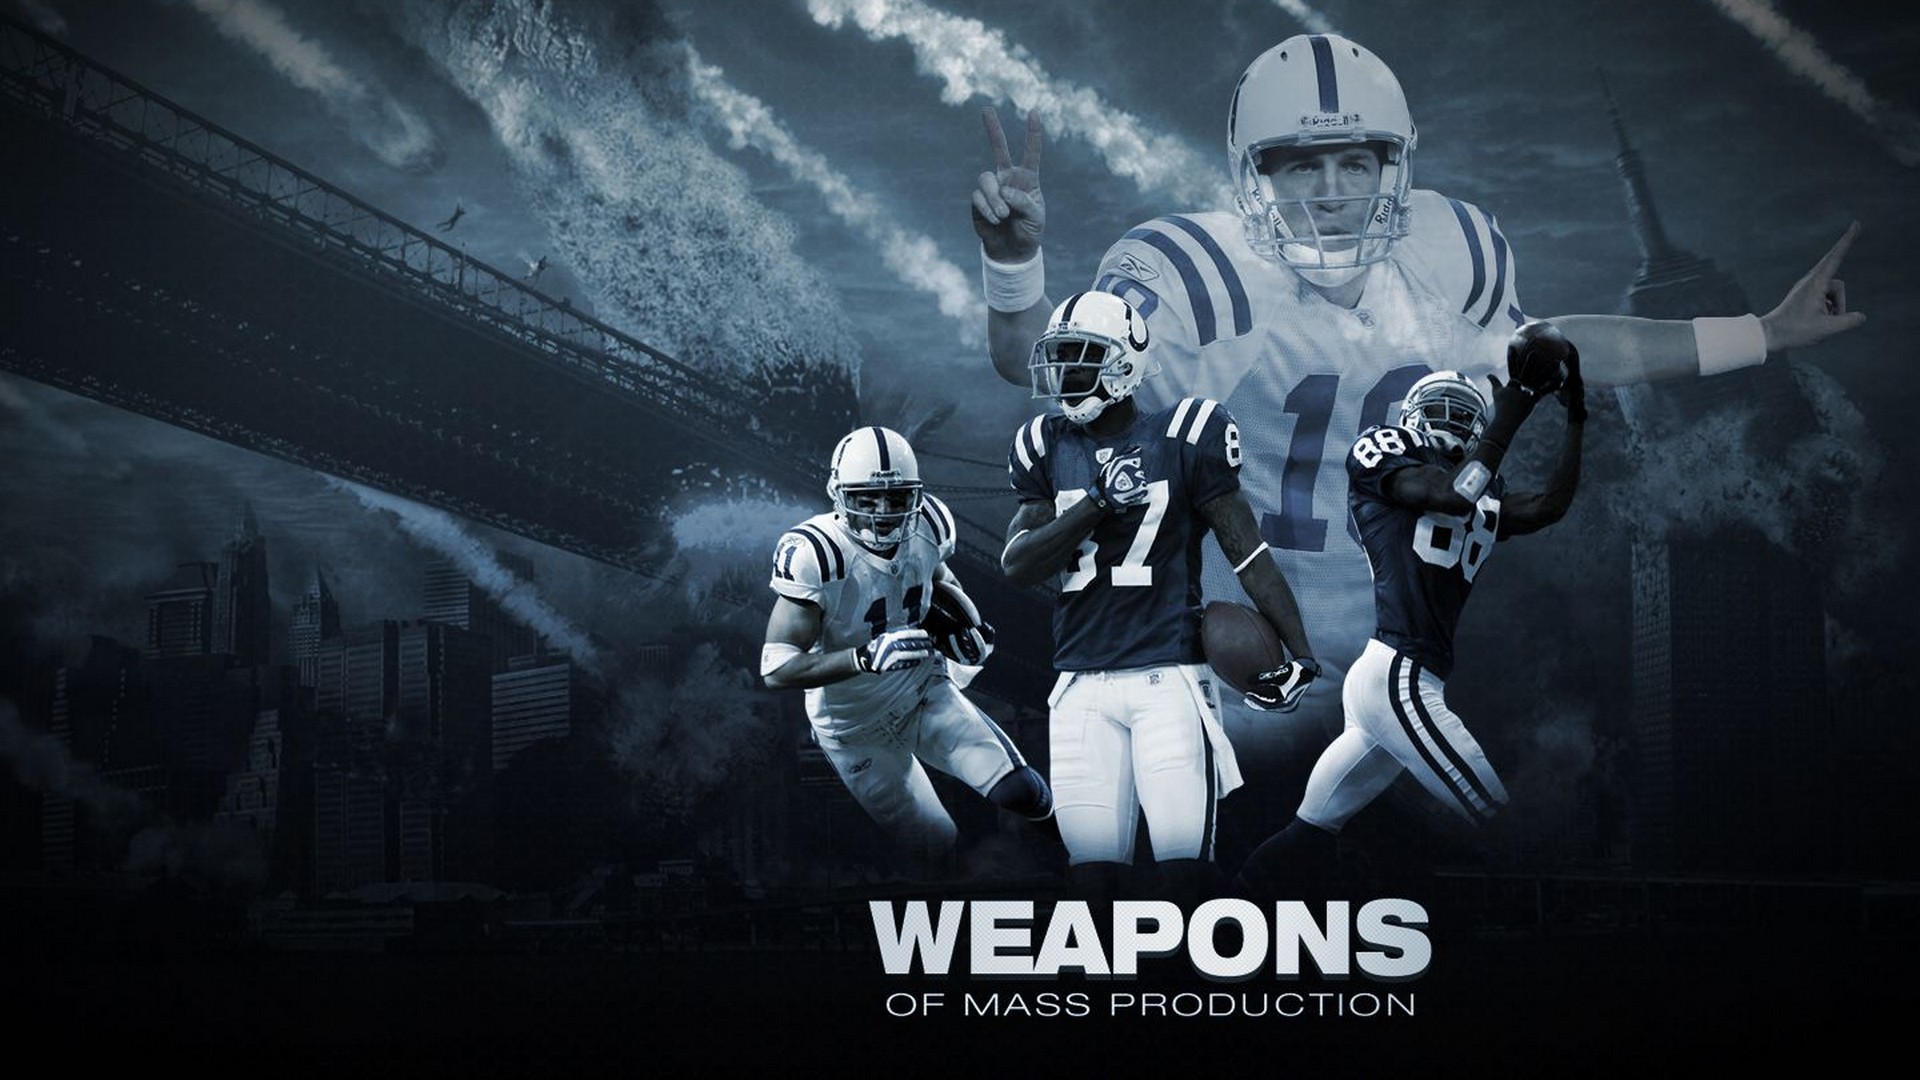 Wallpaper Desktop Indianapolis Colts NFL HD with resolution 1920x1080 pixel. You can make this wallpaper for your Mac or Windows Desktop Background, iPhone, Android or Tablet and another Smartphone device